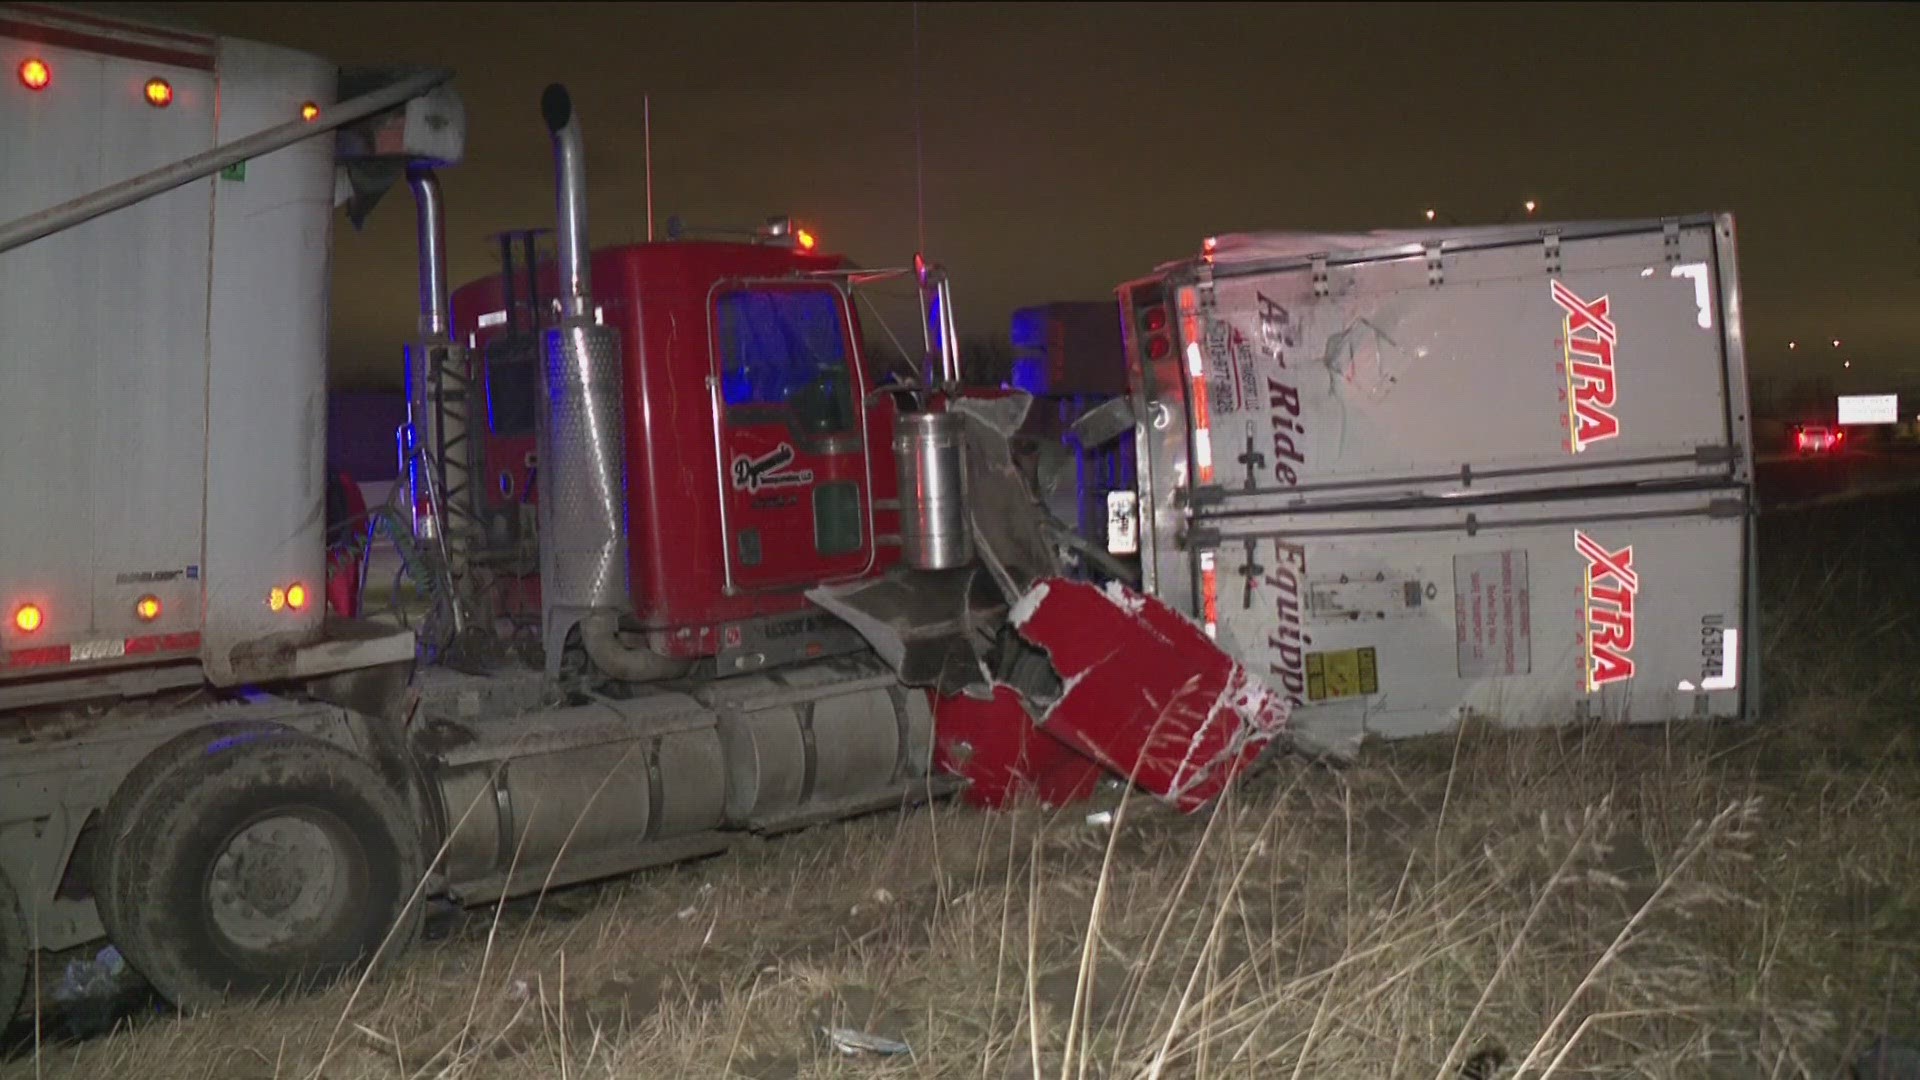 Police told WTOL around 1 a.m. one semi was trying to merge onto the highway when it crashed into another semi, flipping one onto its side.